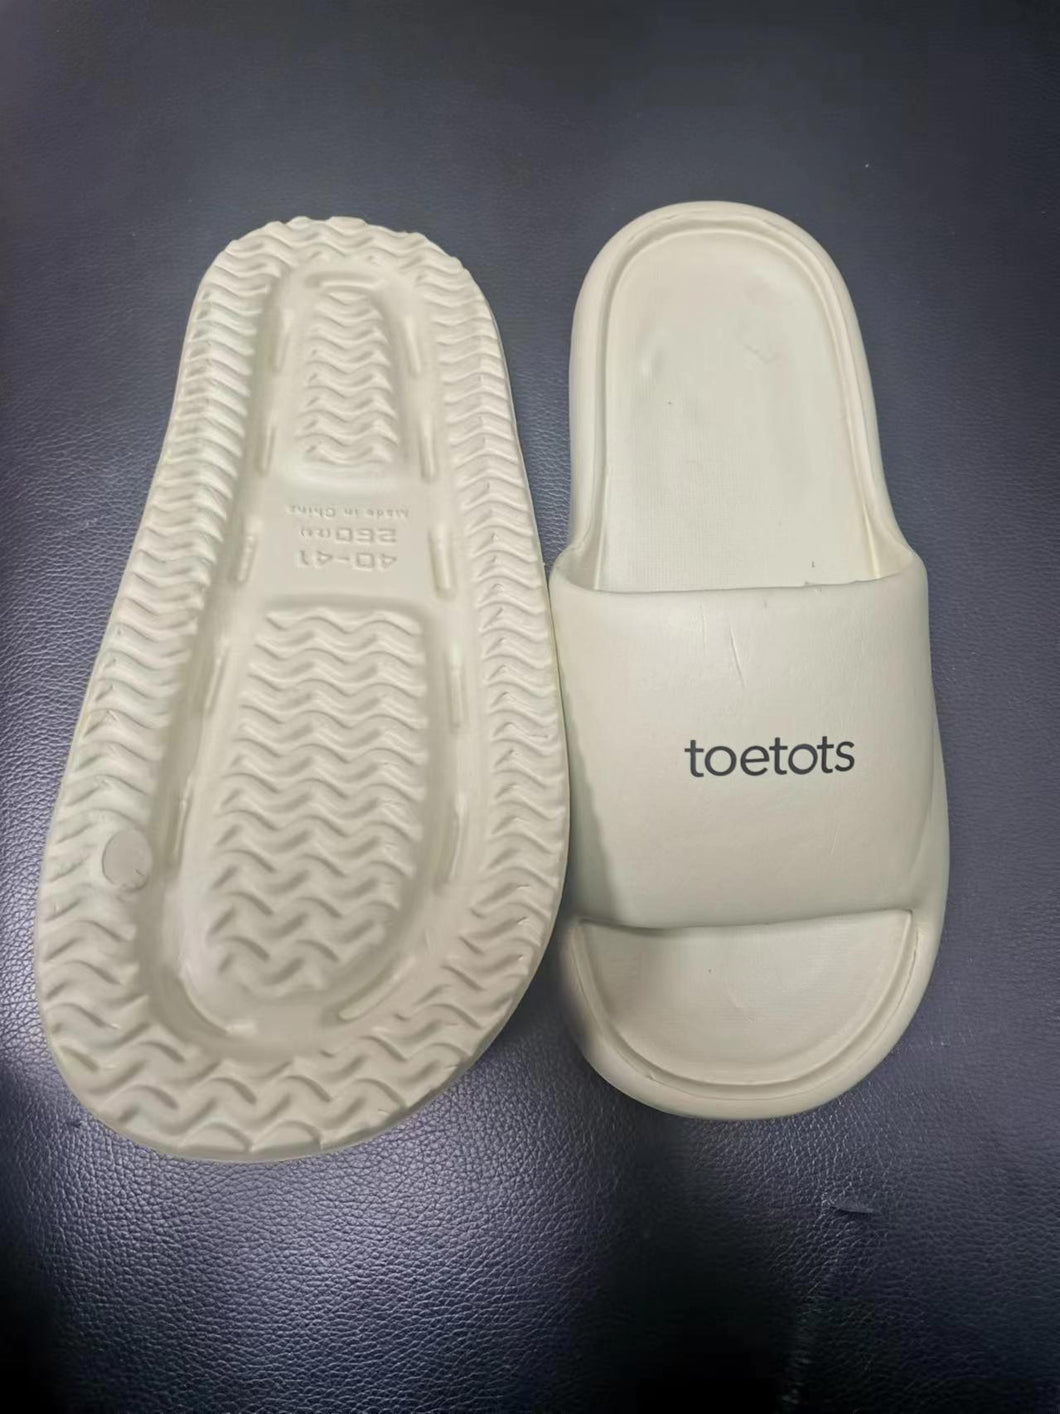 toetots Slippers, non slip, suitable for both men and women in daily household use